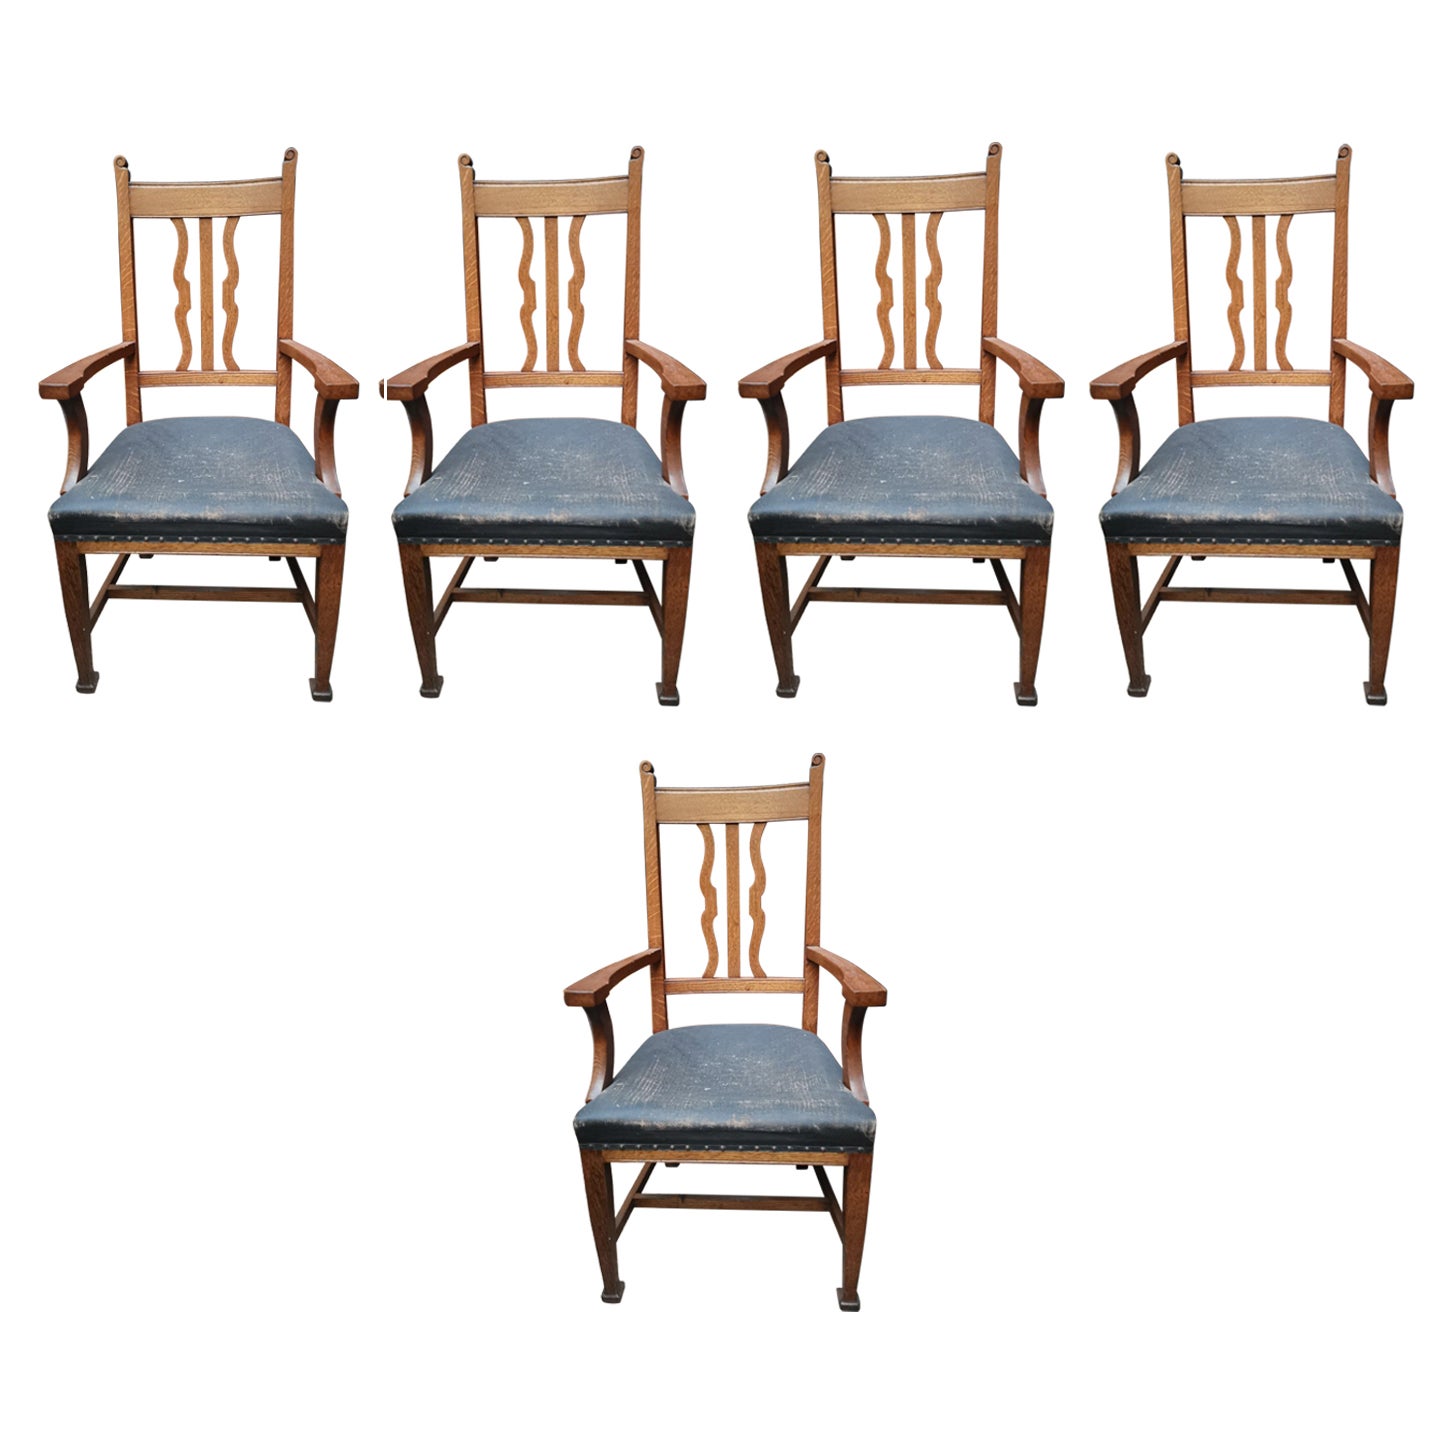 Wylie & Lochhead a Set of Five Scottish Arts & Crafts Oak Dining Chairs '4 + 1'